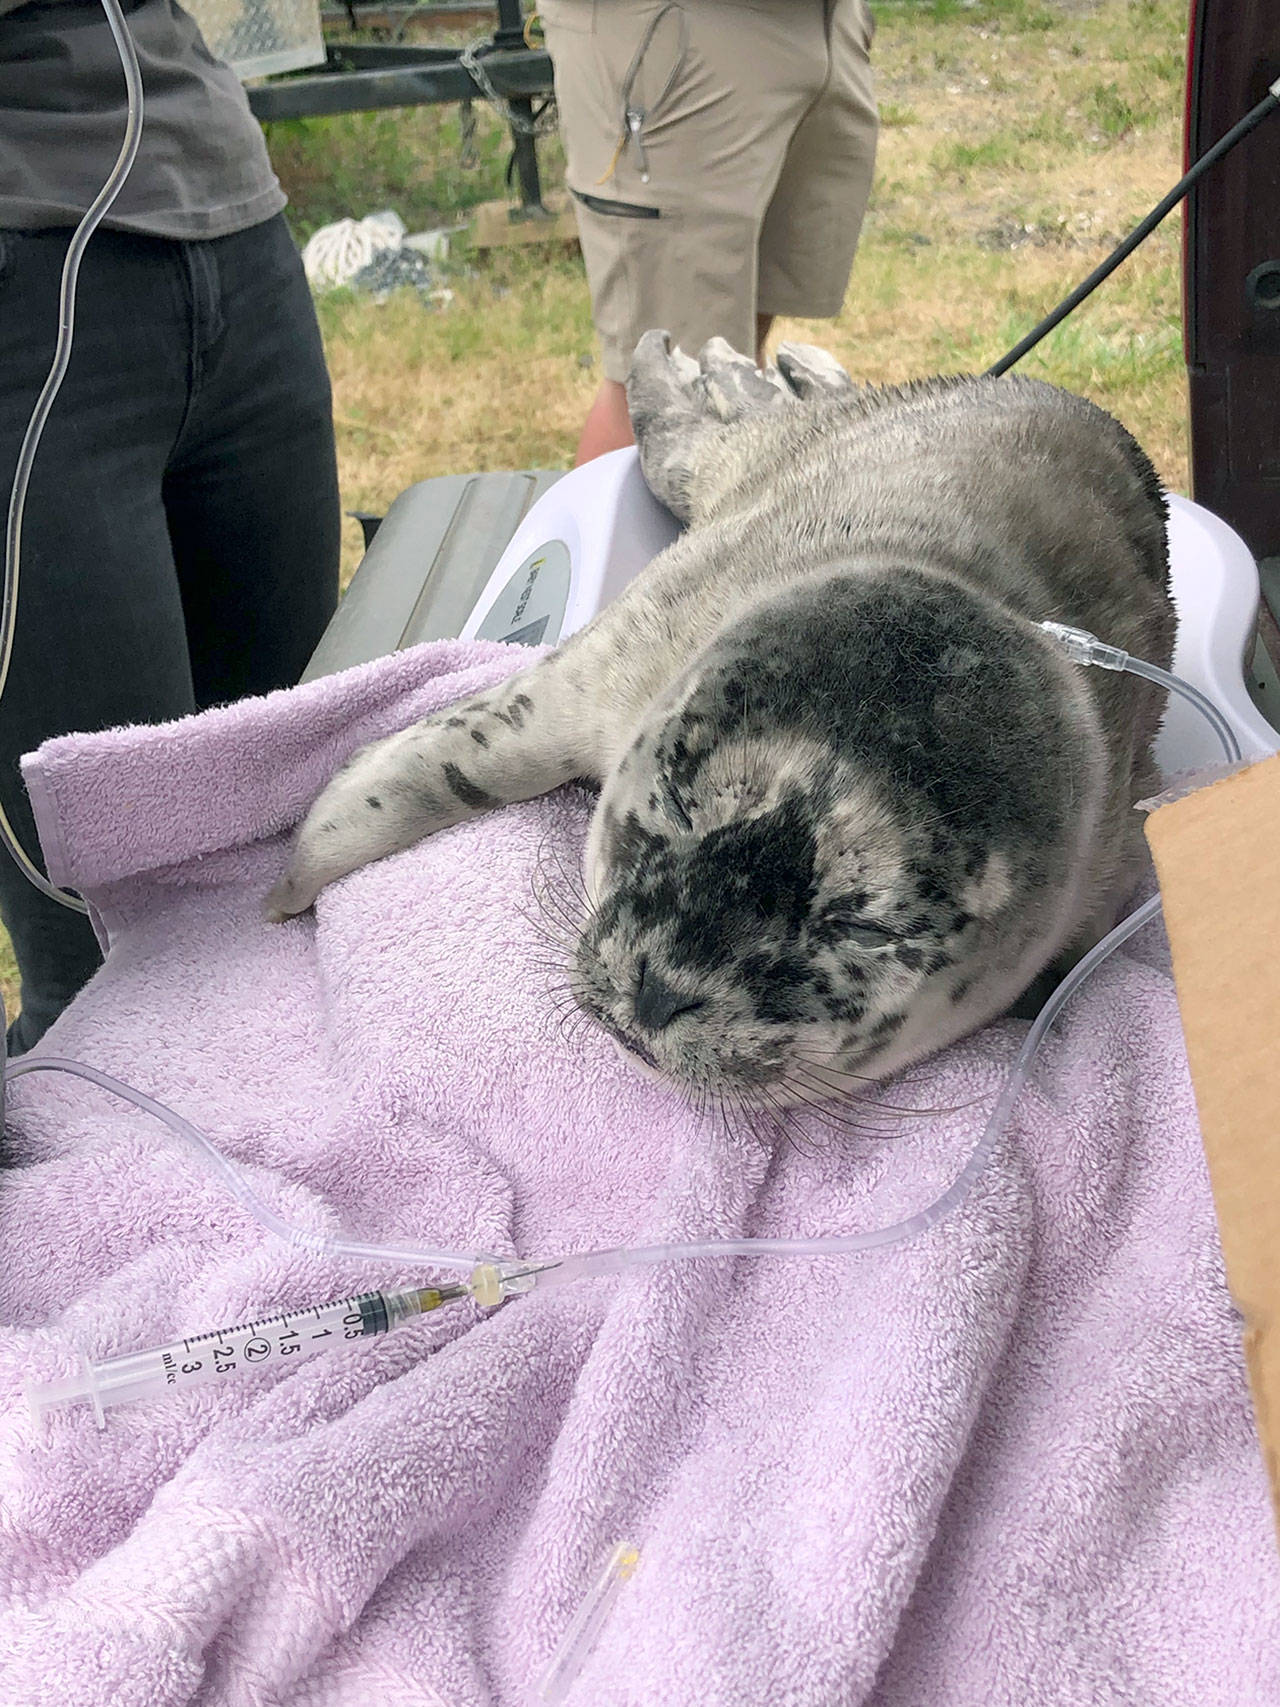 A harbor seal pup receives fluids prior to being relocated by volunteers with the Port Townsend Marine Science Center’s Marine Mammal Stranding Network after it was weakened by human interaction over the Fourth of July weekend. (Port Townsend Marine Science Center)